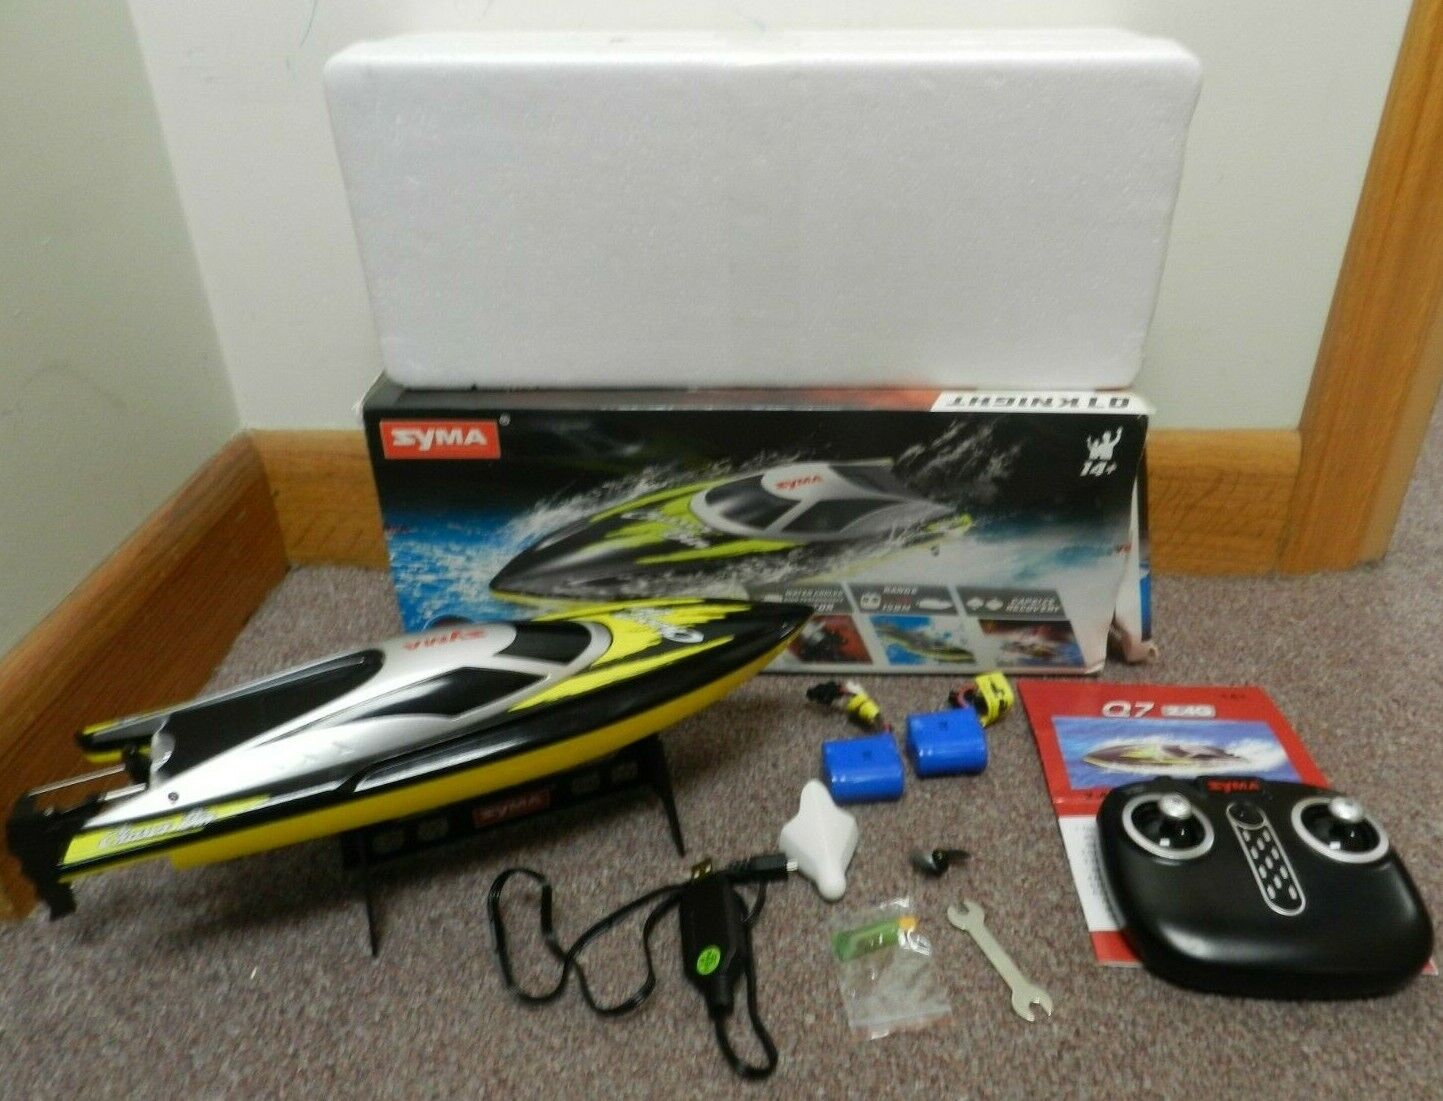 SYMA Q7 Knight RC Remote Control Boat for Adults/Kids, 20+ km/h 2.4GHz (Used)